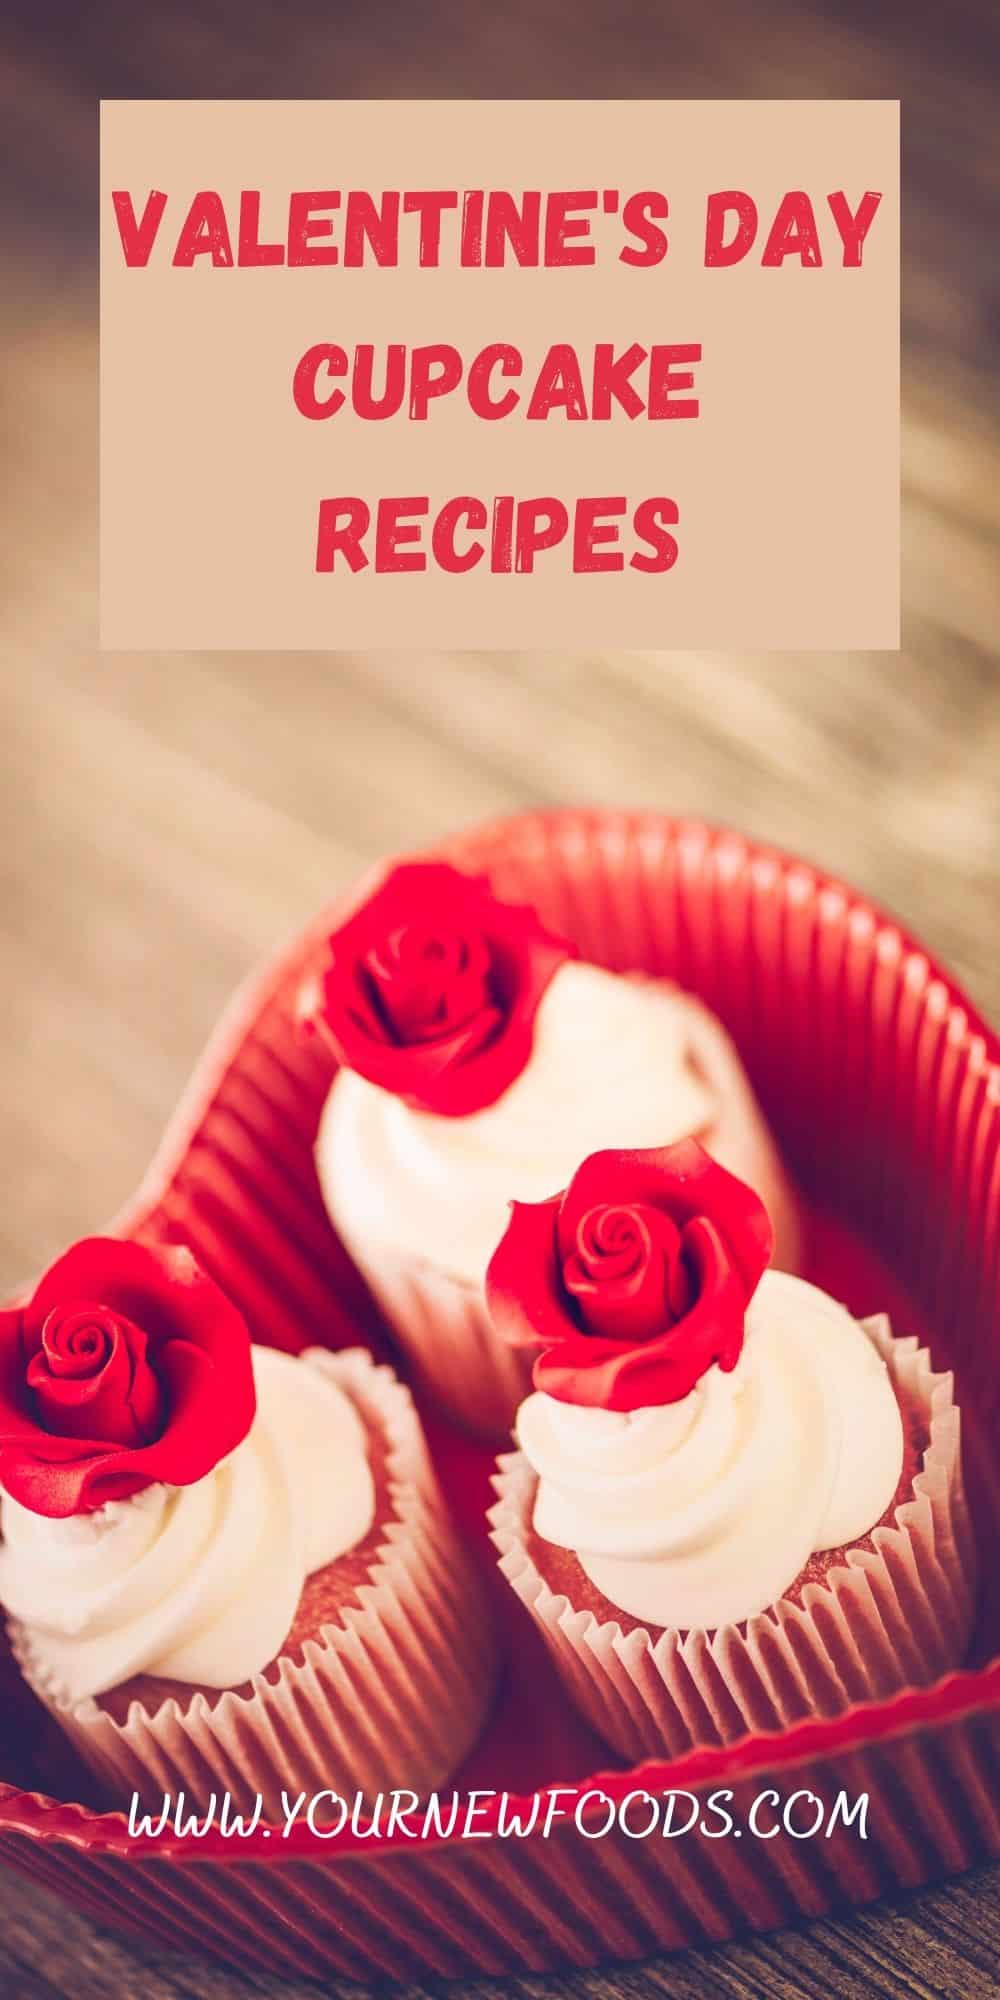 3 Valentine's Day Cupcakes with red rose frosting on top